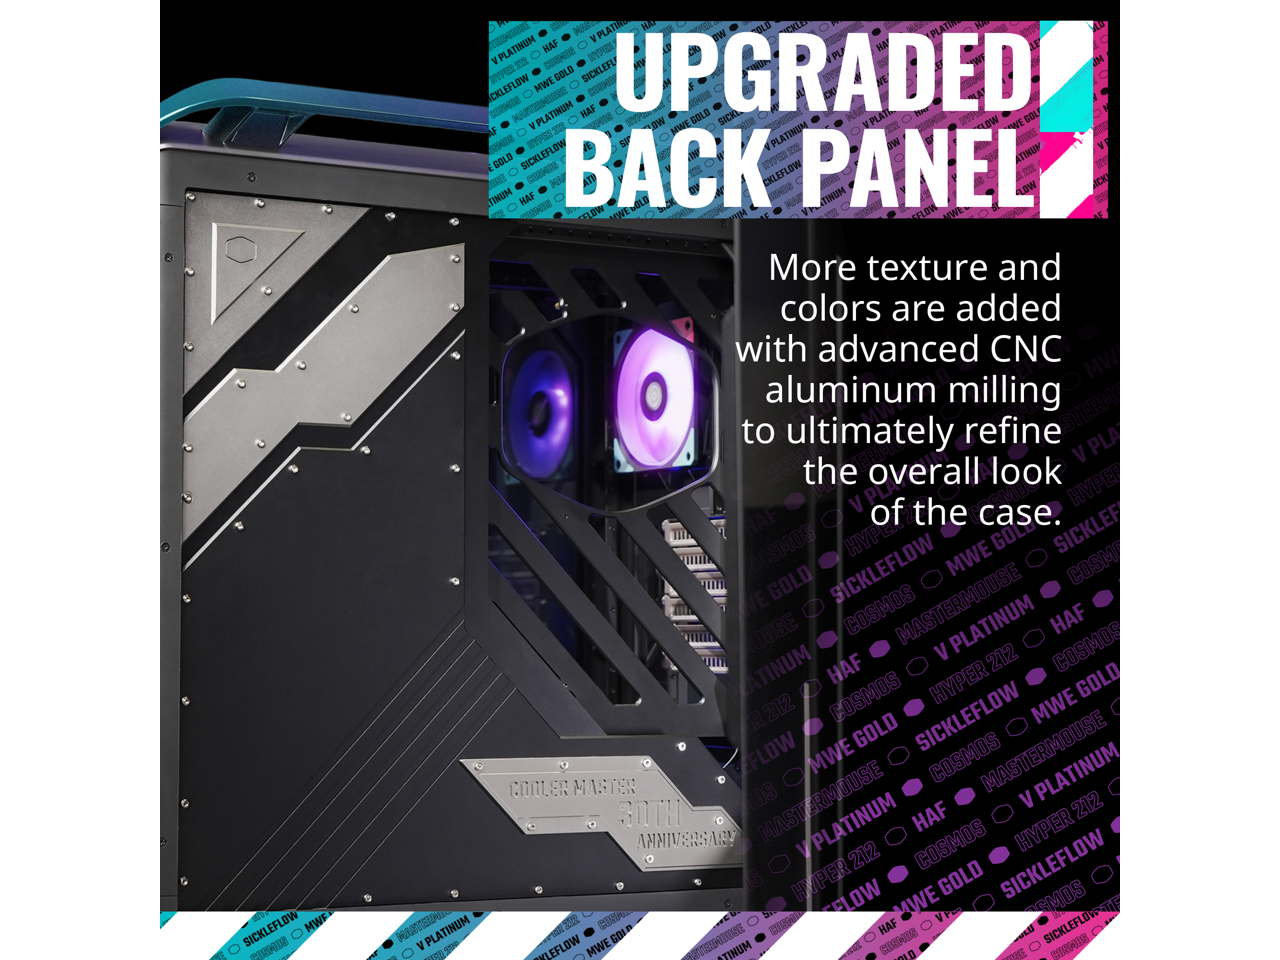 Cooler Master Cosmos Infinity 30th Anniversary C700M E-ATX Full-Tower Curved Tempered Glass Panel, Riser Cable PCIe 4.0, Diverse Liquid Cooling, Type-C, Customizable ARGB (MCC-C700M-KHNN-S30)